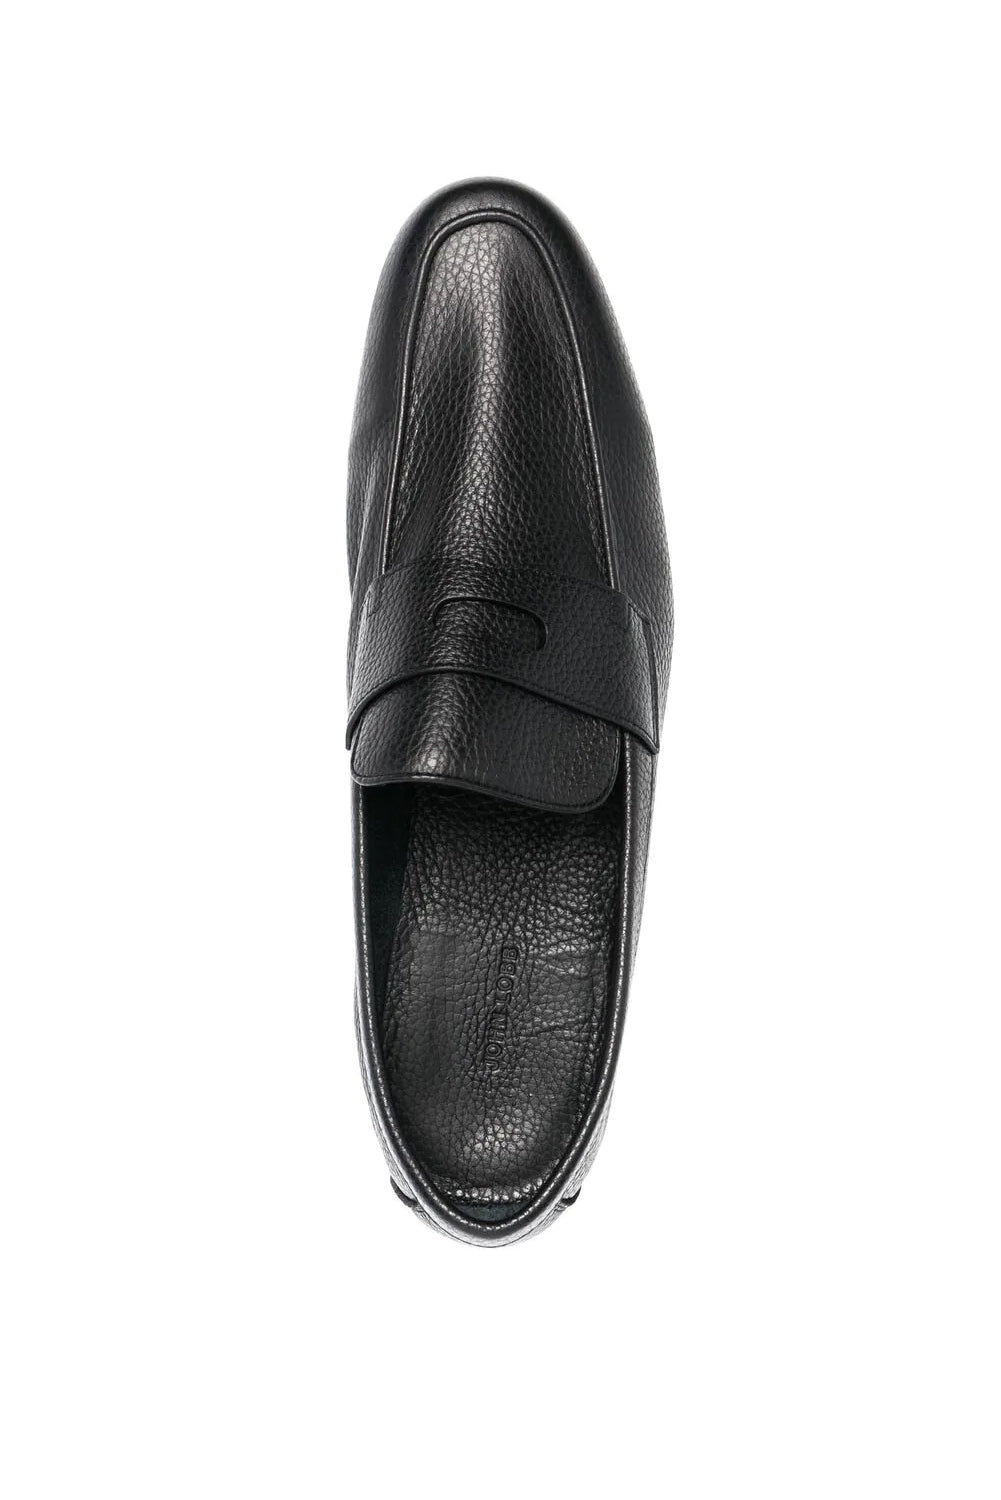 Grained leather loafers